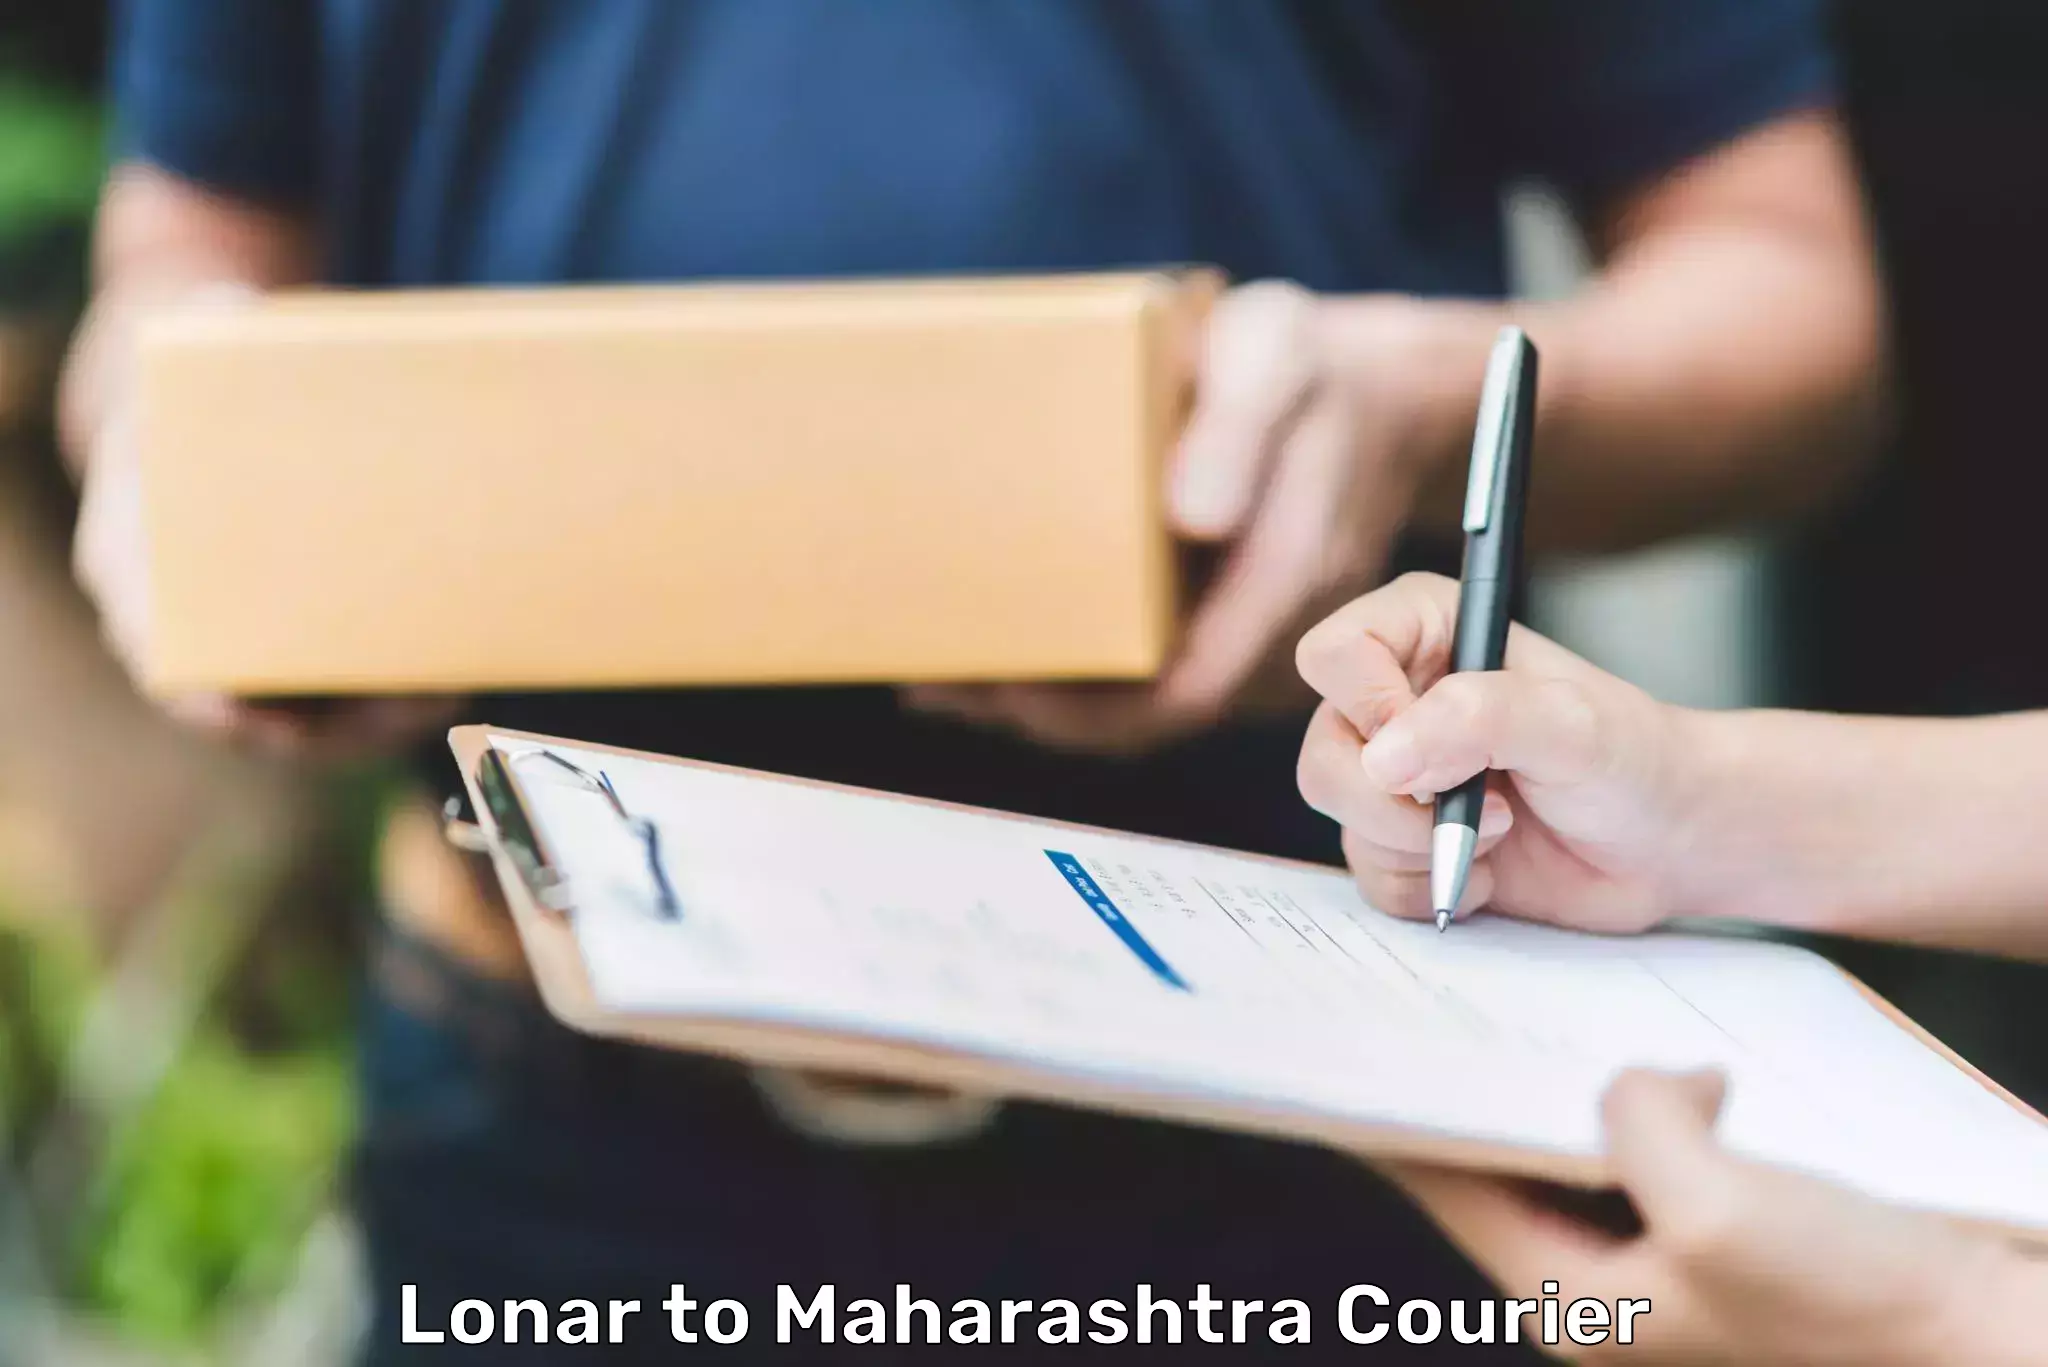 Expedited parcel delivery in Lonar to Maharashtra